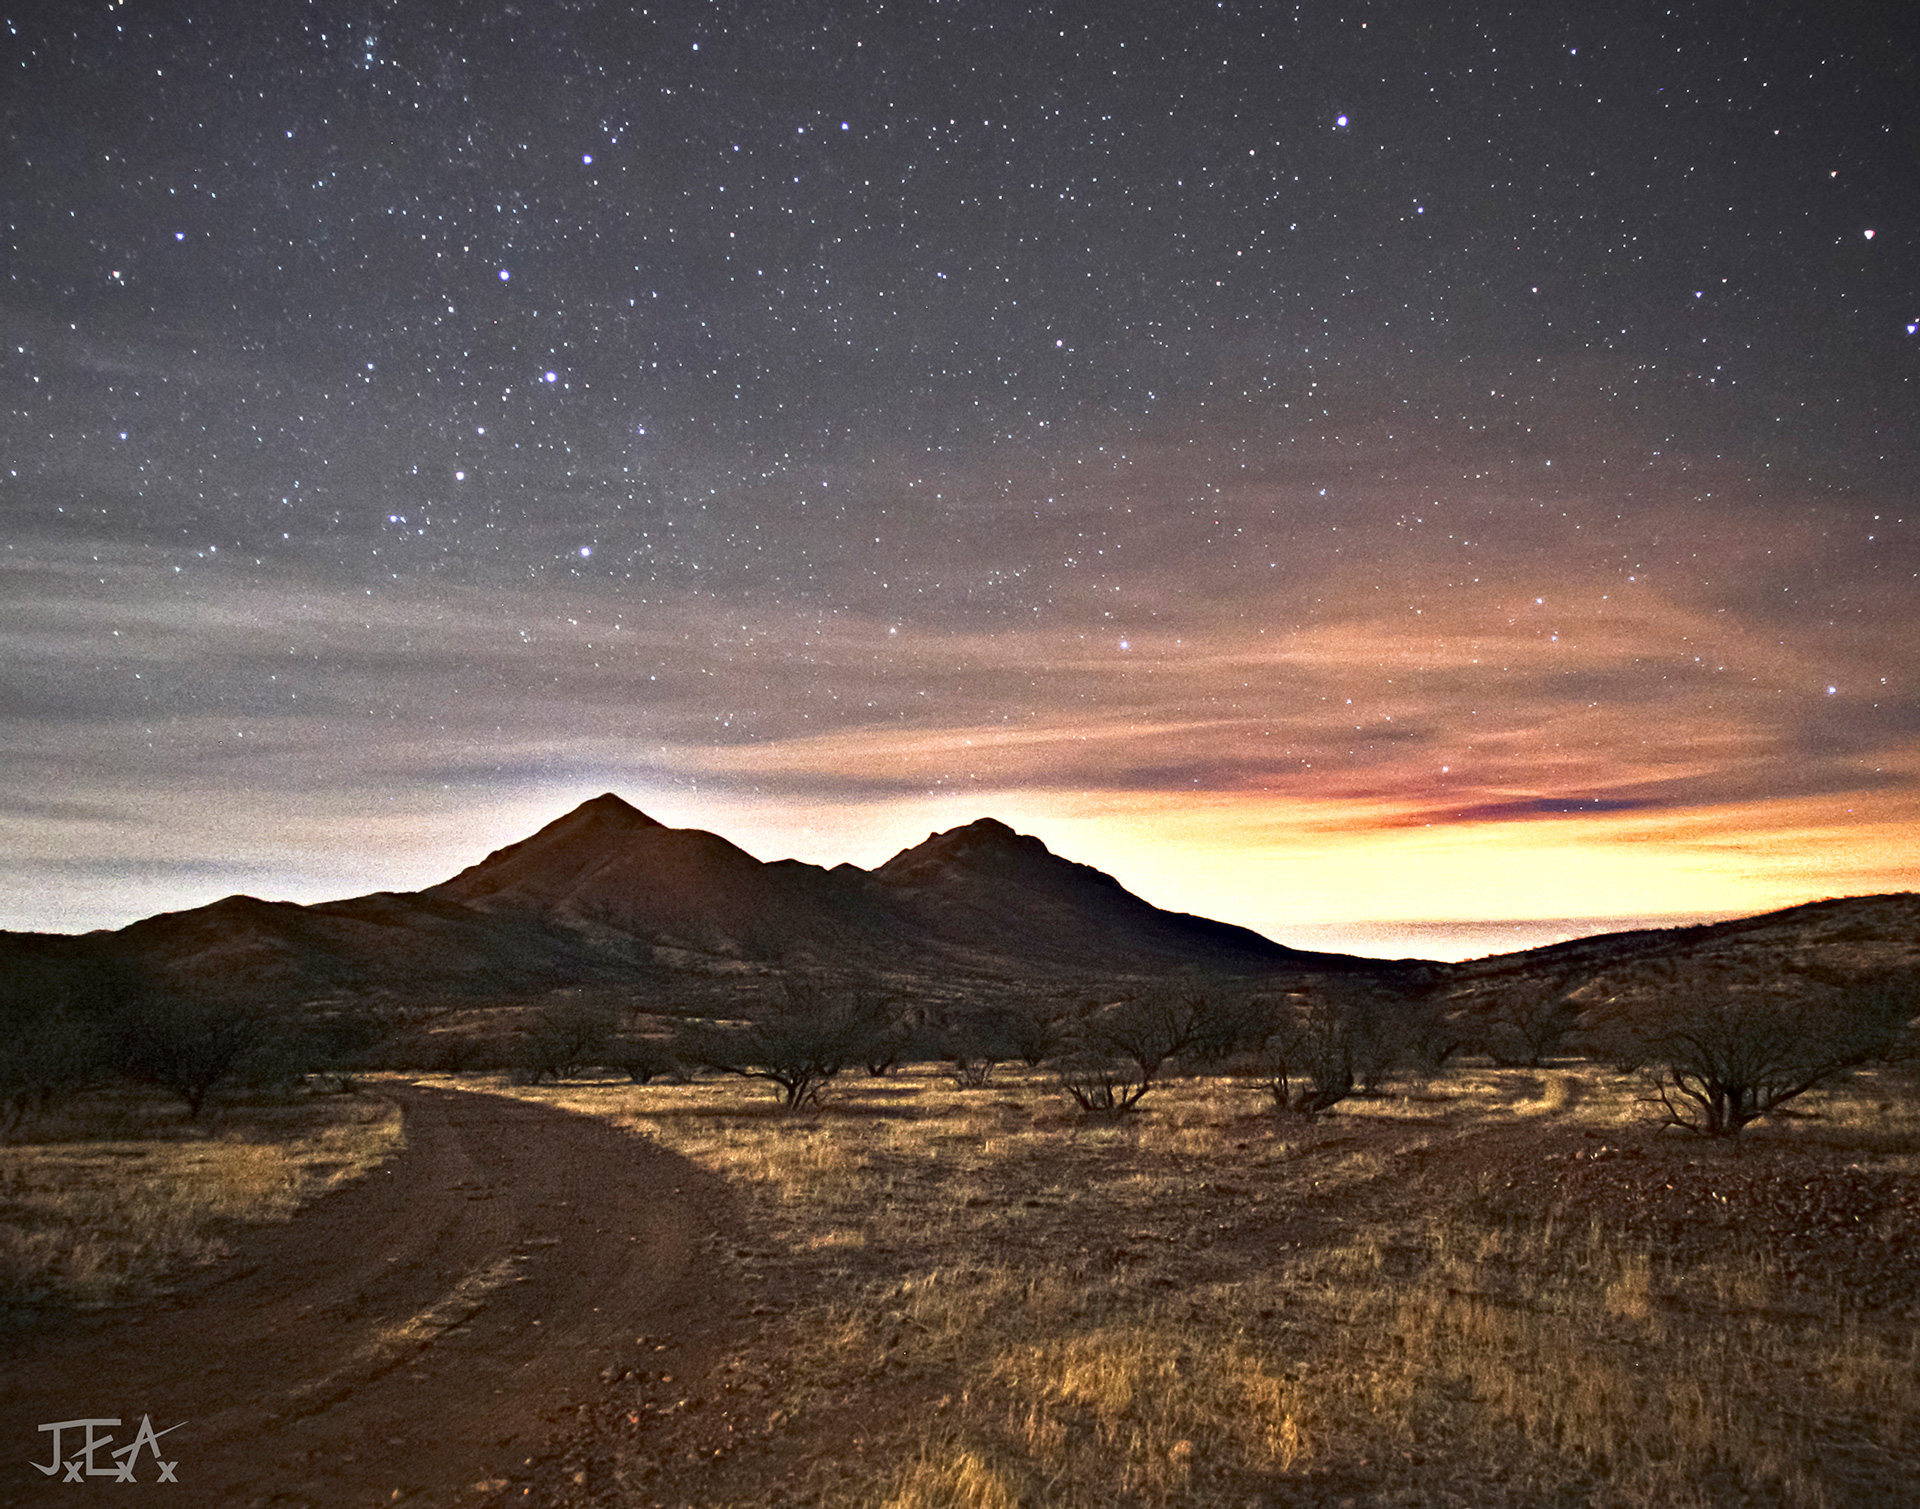 A cureved dirt road in the desert, with bare mesquite trees and yellowed grass in the foreground. In the background sits a two peaked mountain with heavily starred skys and a red glow from distant cities peeking from behind.